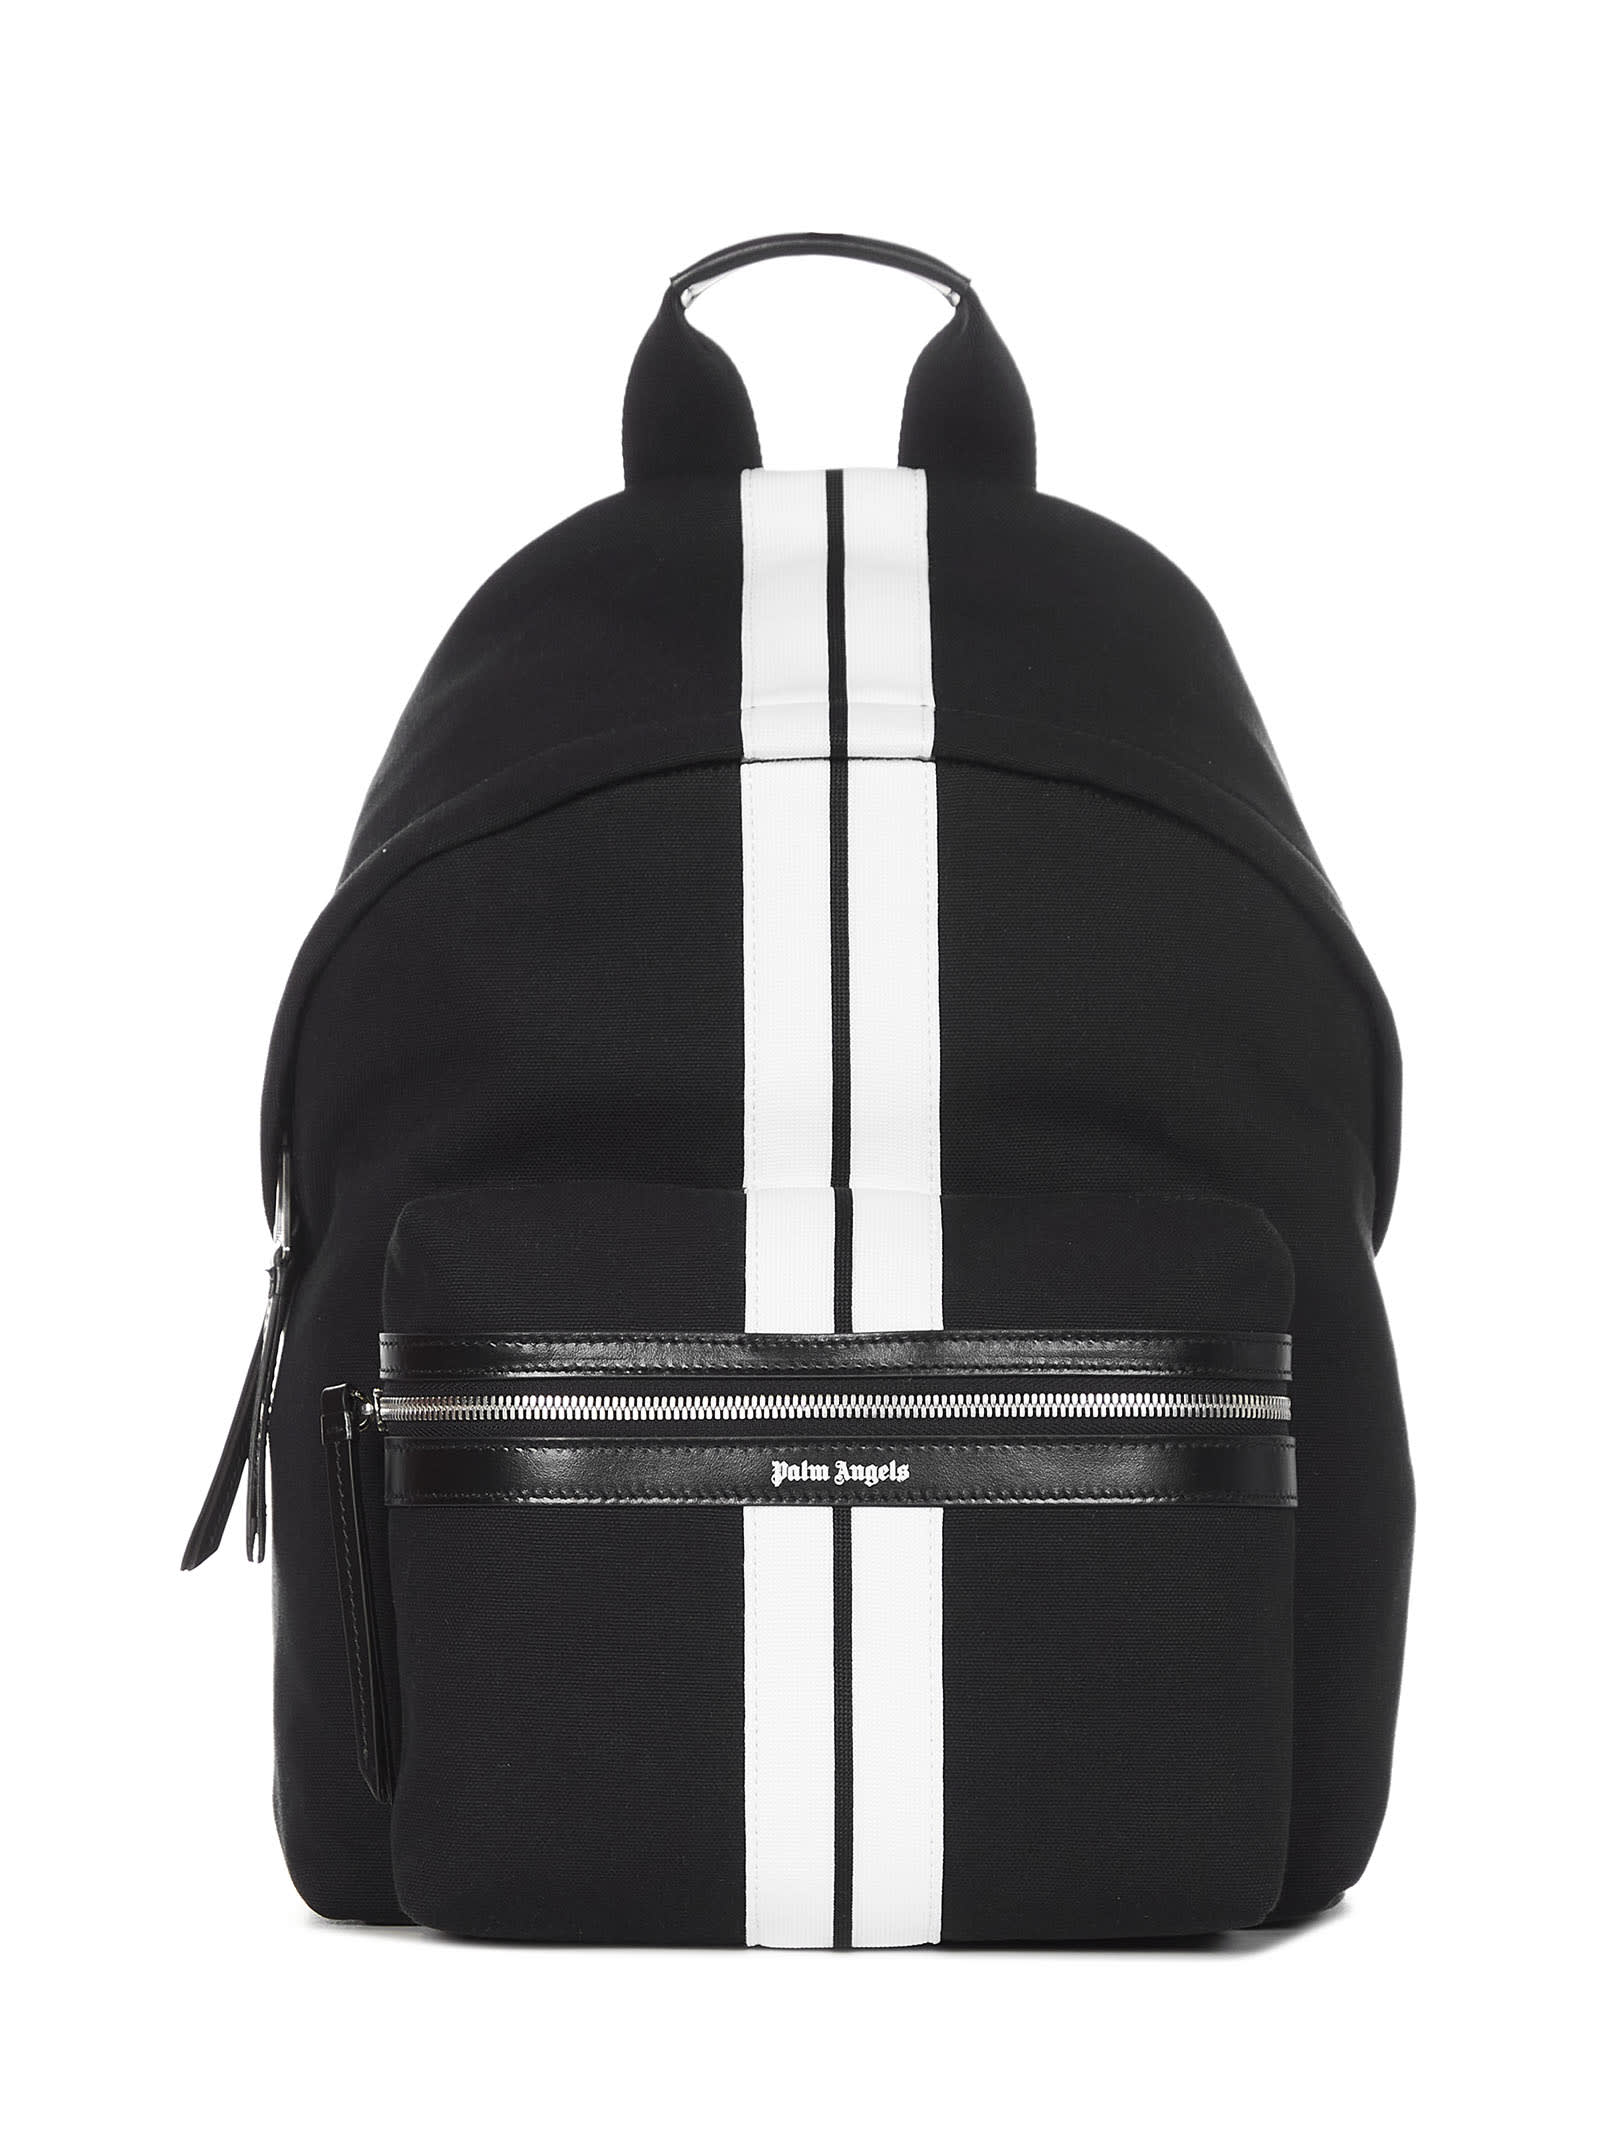 Palm Angels Venice Backpack